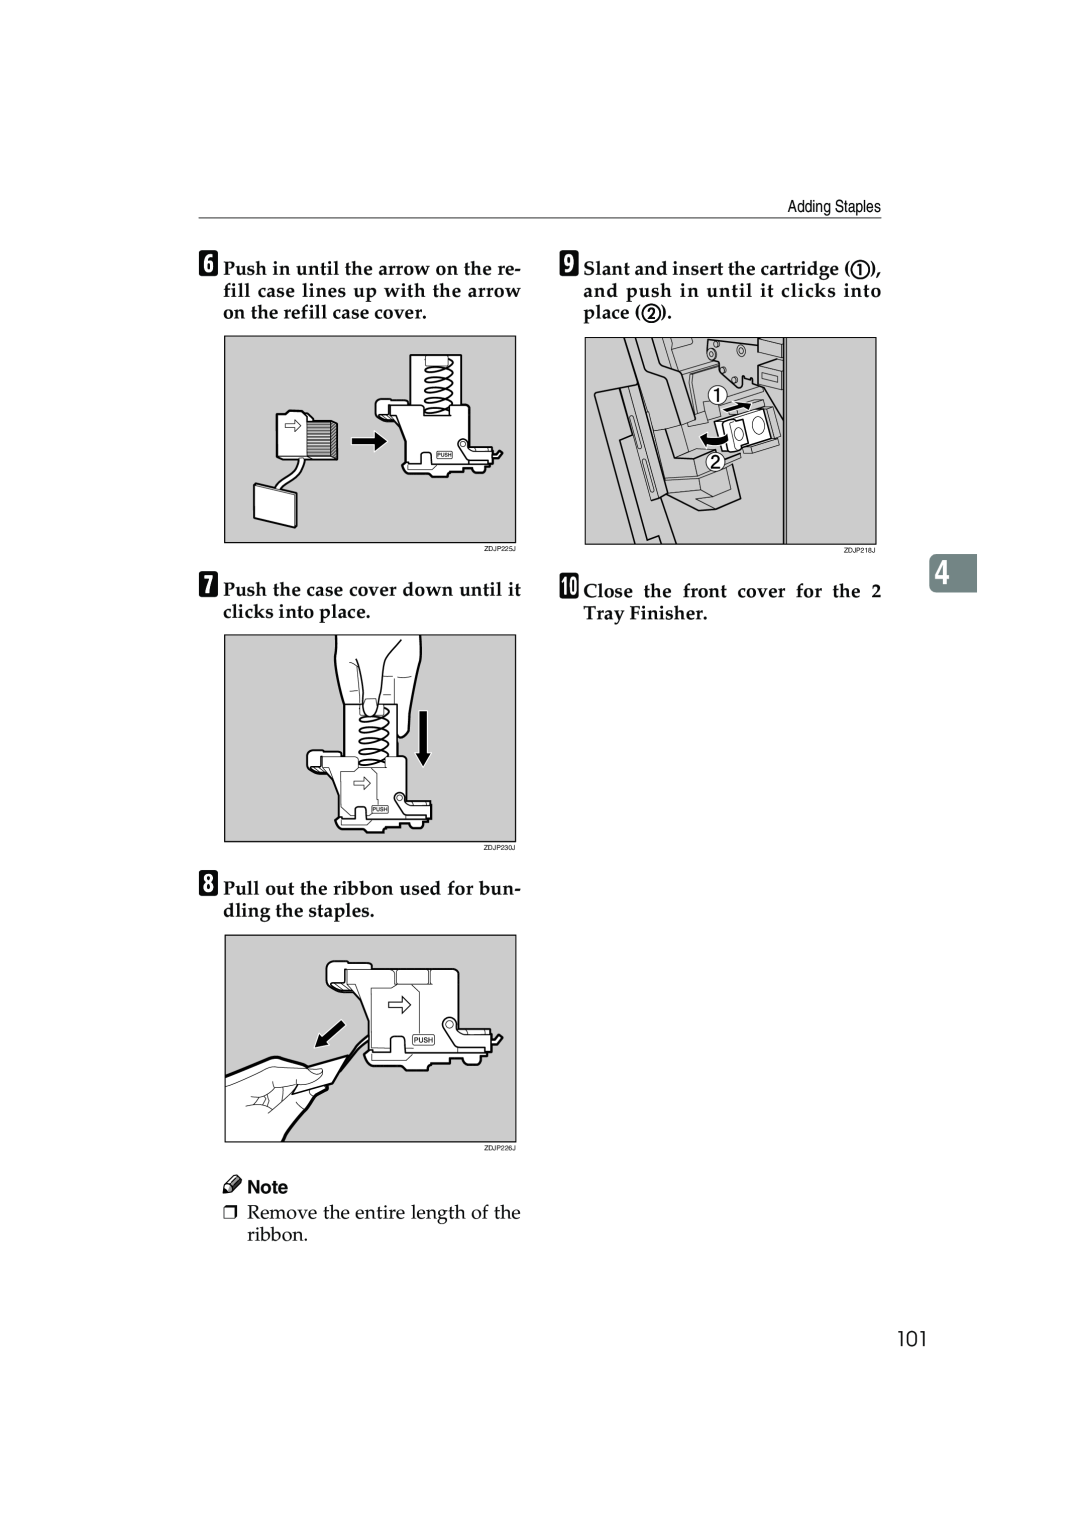 Ricoh AP3800C operating instructions J Close the front cover for the 2 4 Tray Finisher 